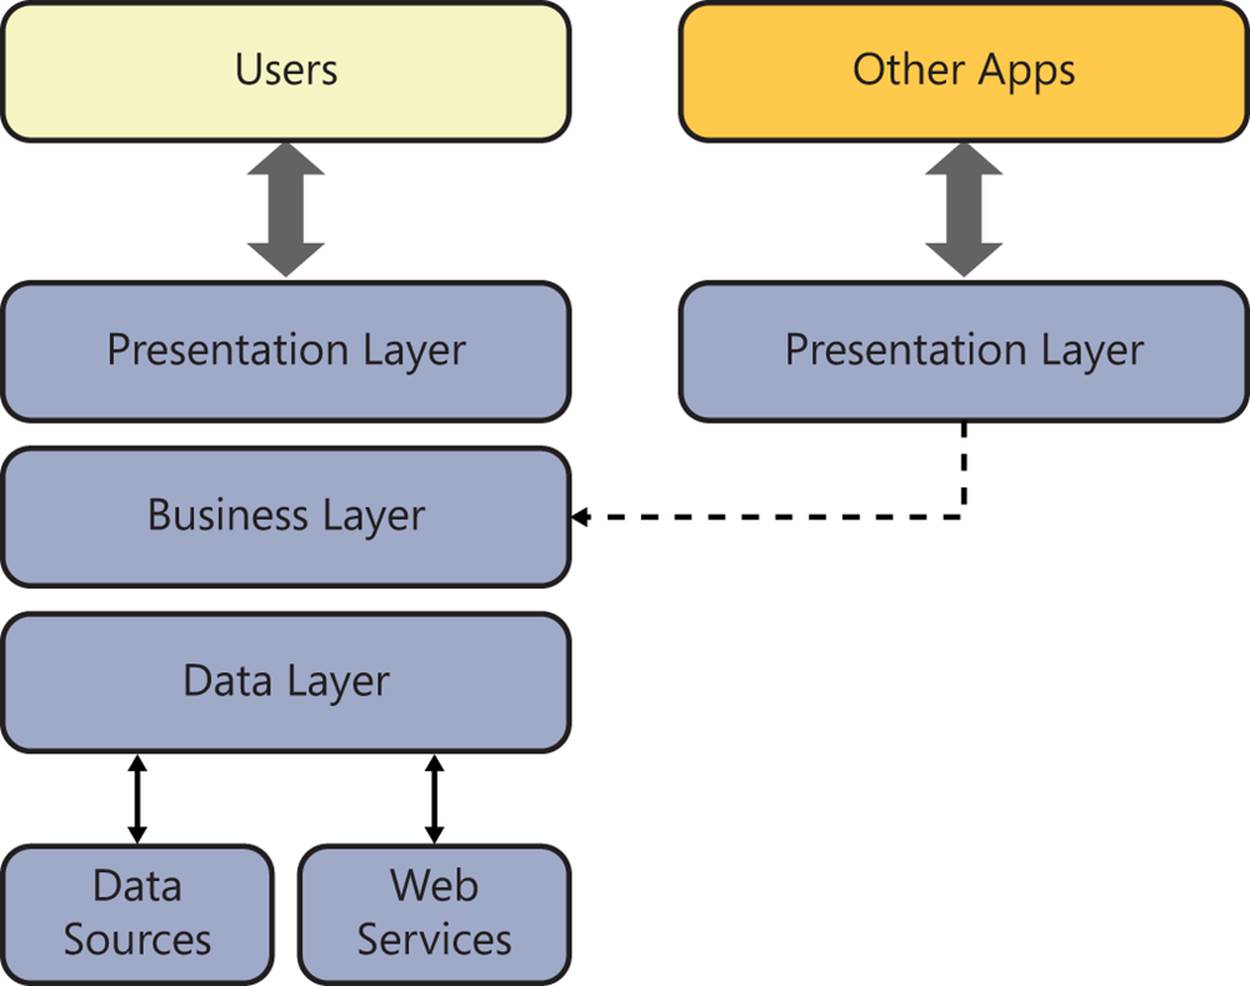 A diagram illustrating the logical layers of a solution. The Users box is on the top left, with a three-layer architecture below it that includes Presentation Layer, Business Layer, and Data Layer. The Other Apps box is on the top right with Presentation Layer below it and a dashed line connecting Presentation Layer to Business Layer on the left. Two-way arrows connect the Data Layer box to boxes below it: Data Sources and Web Services.